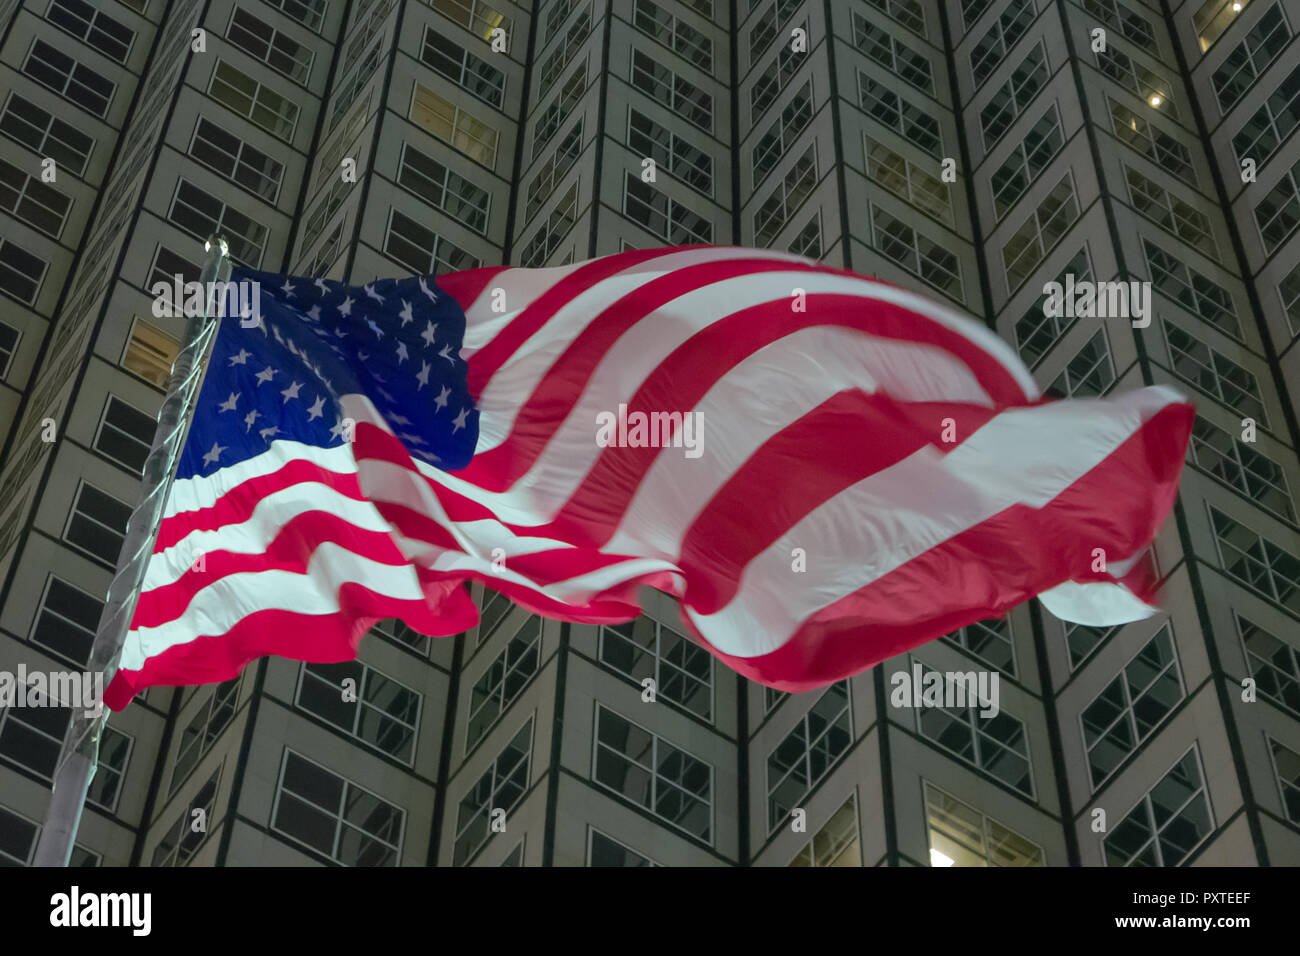 USA flag in front of business building at night Stock Photo